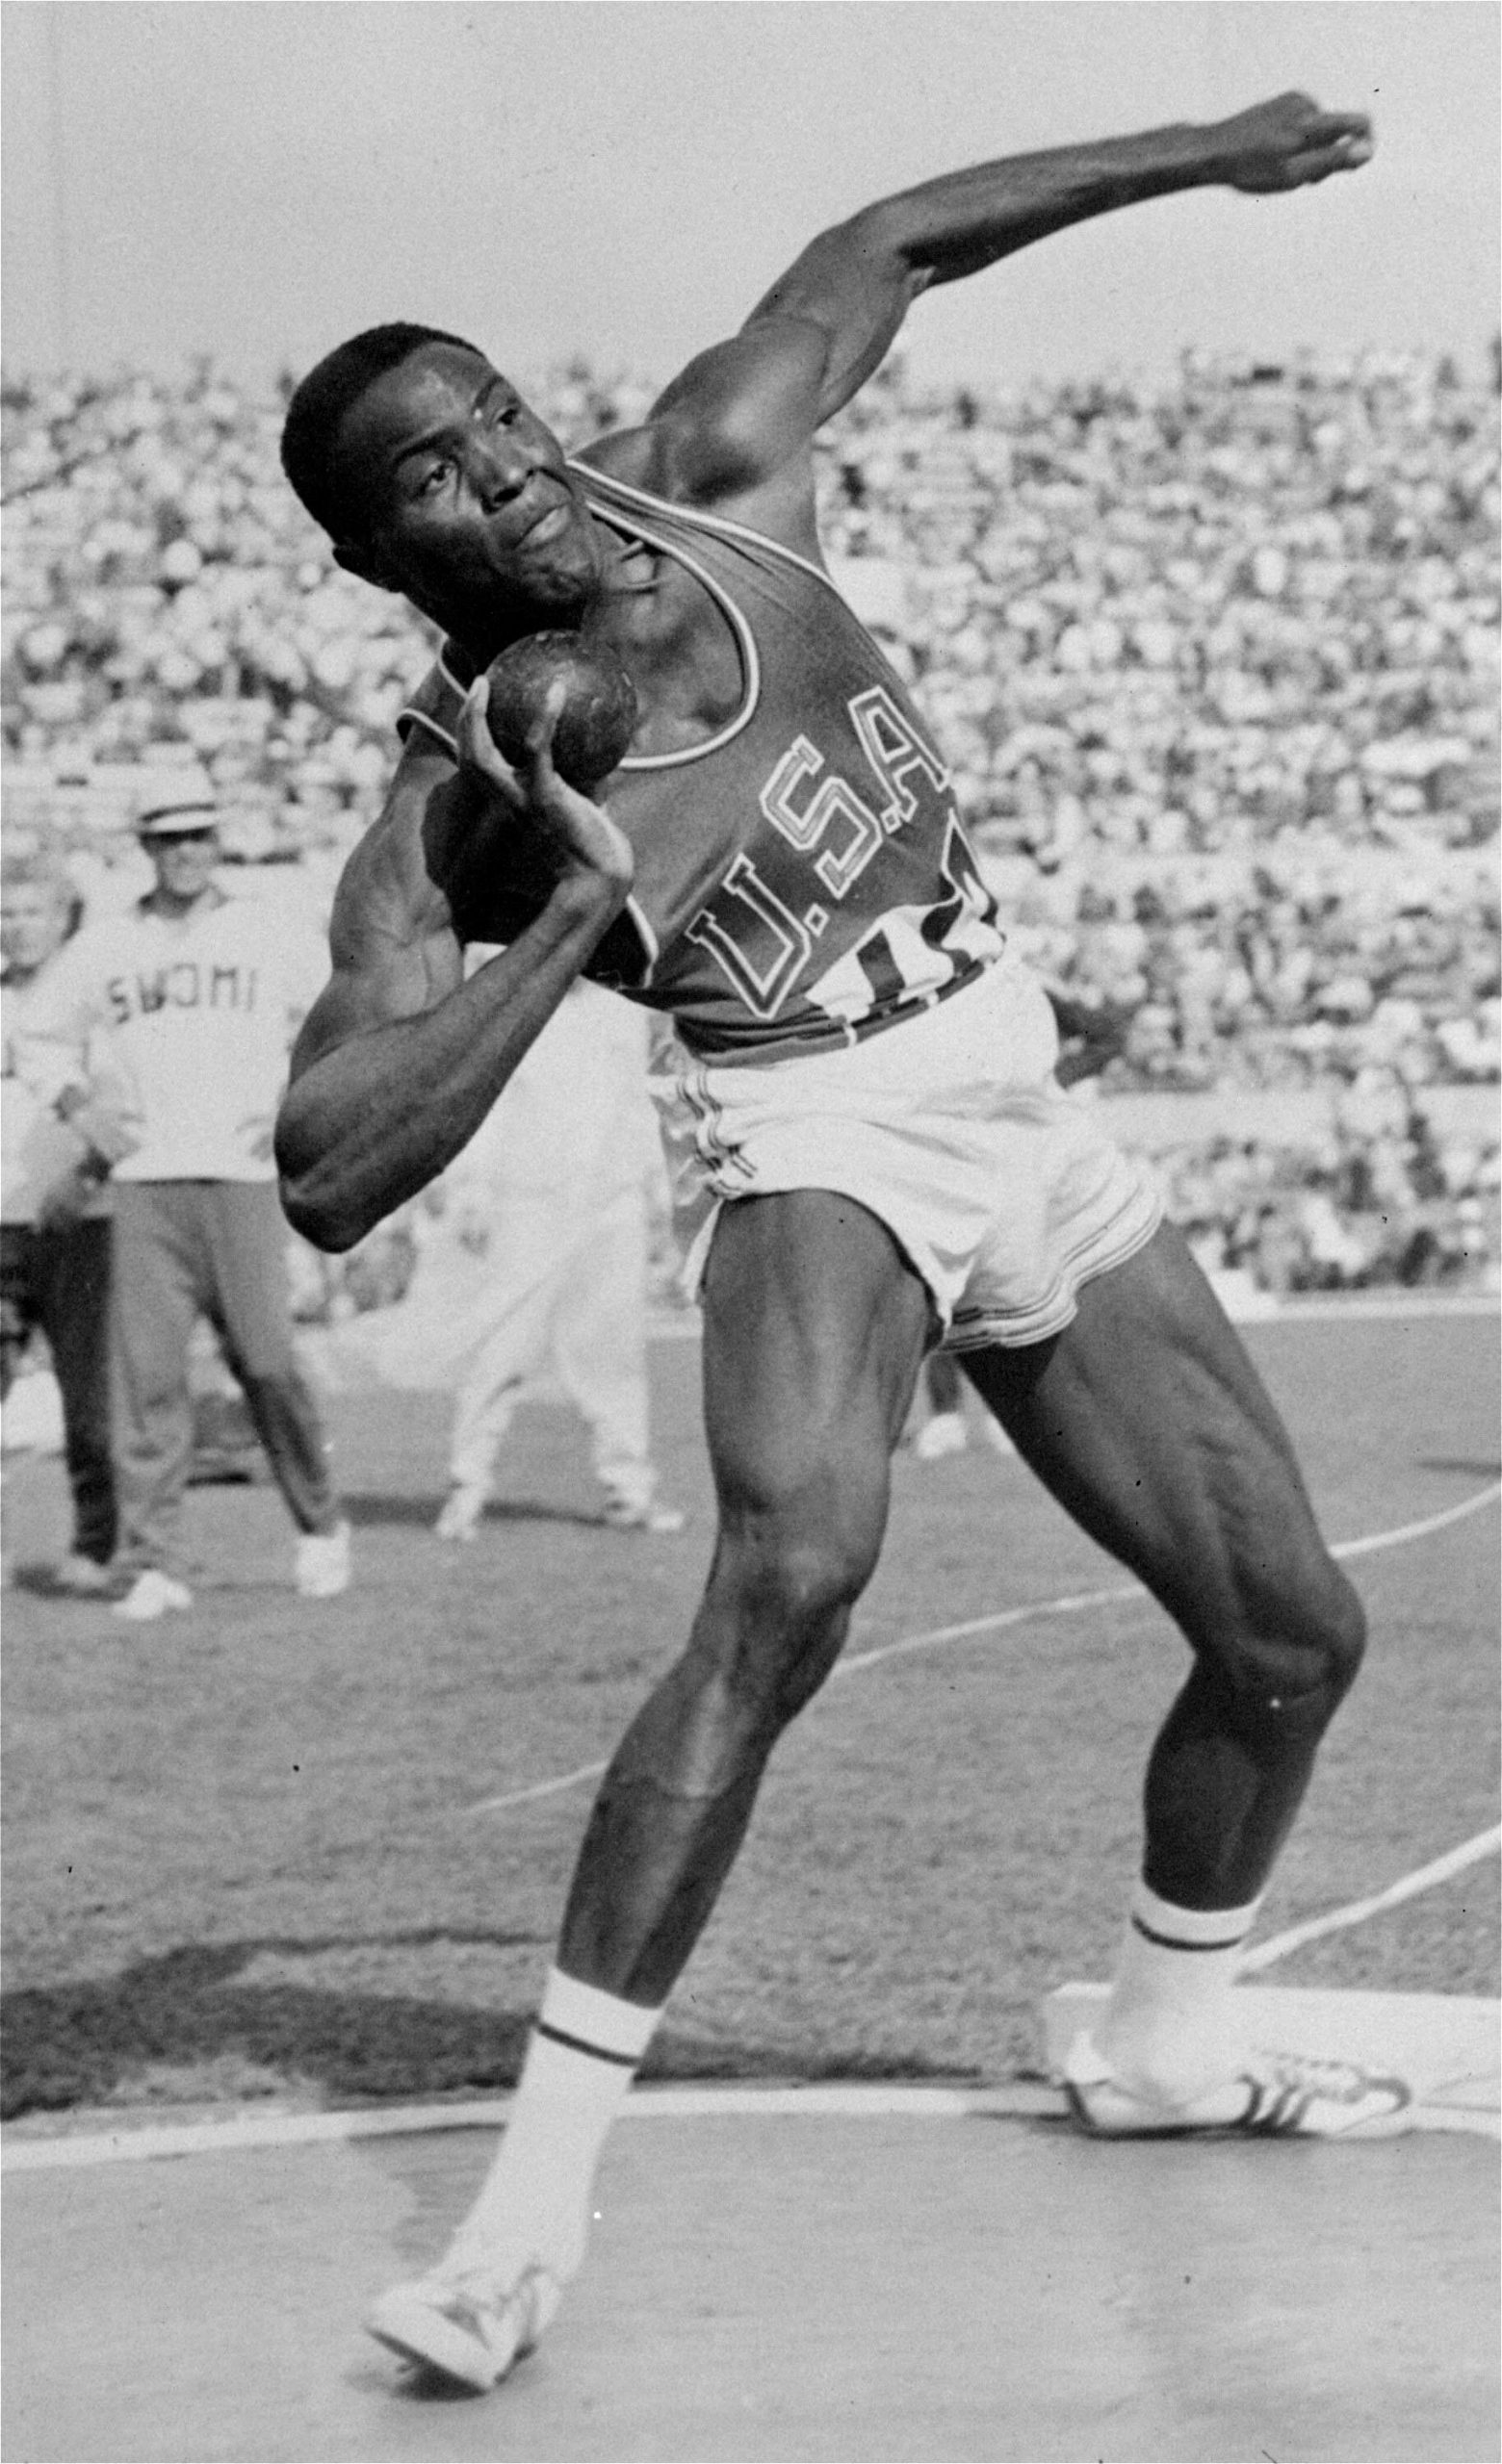 In this Sept. 5, 1960, file photo, Rafer Johnson of the United States competes in the shot put event of the Olympic decathlon competition in Rome, Italy.